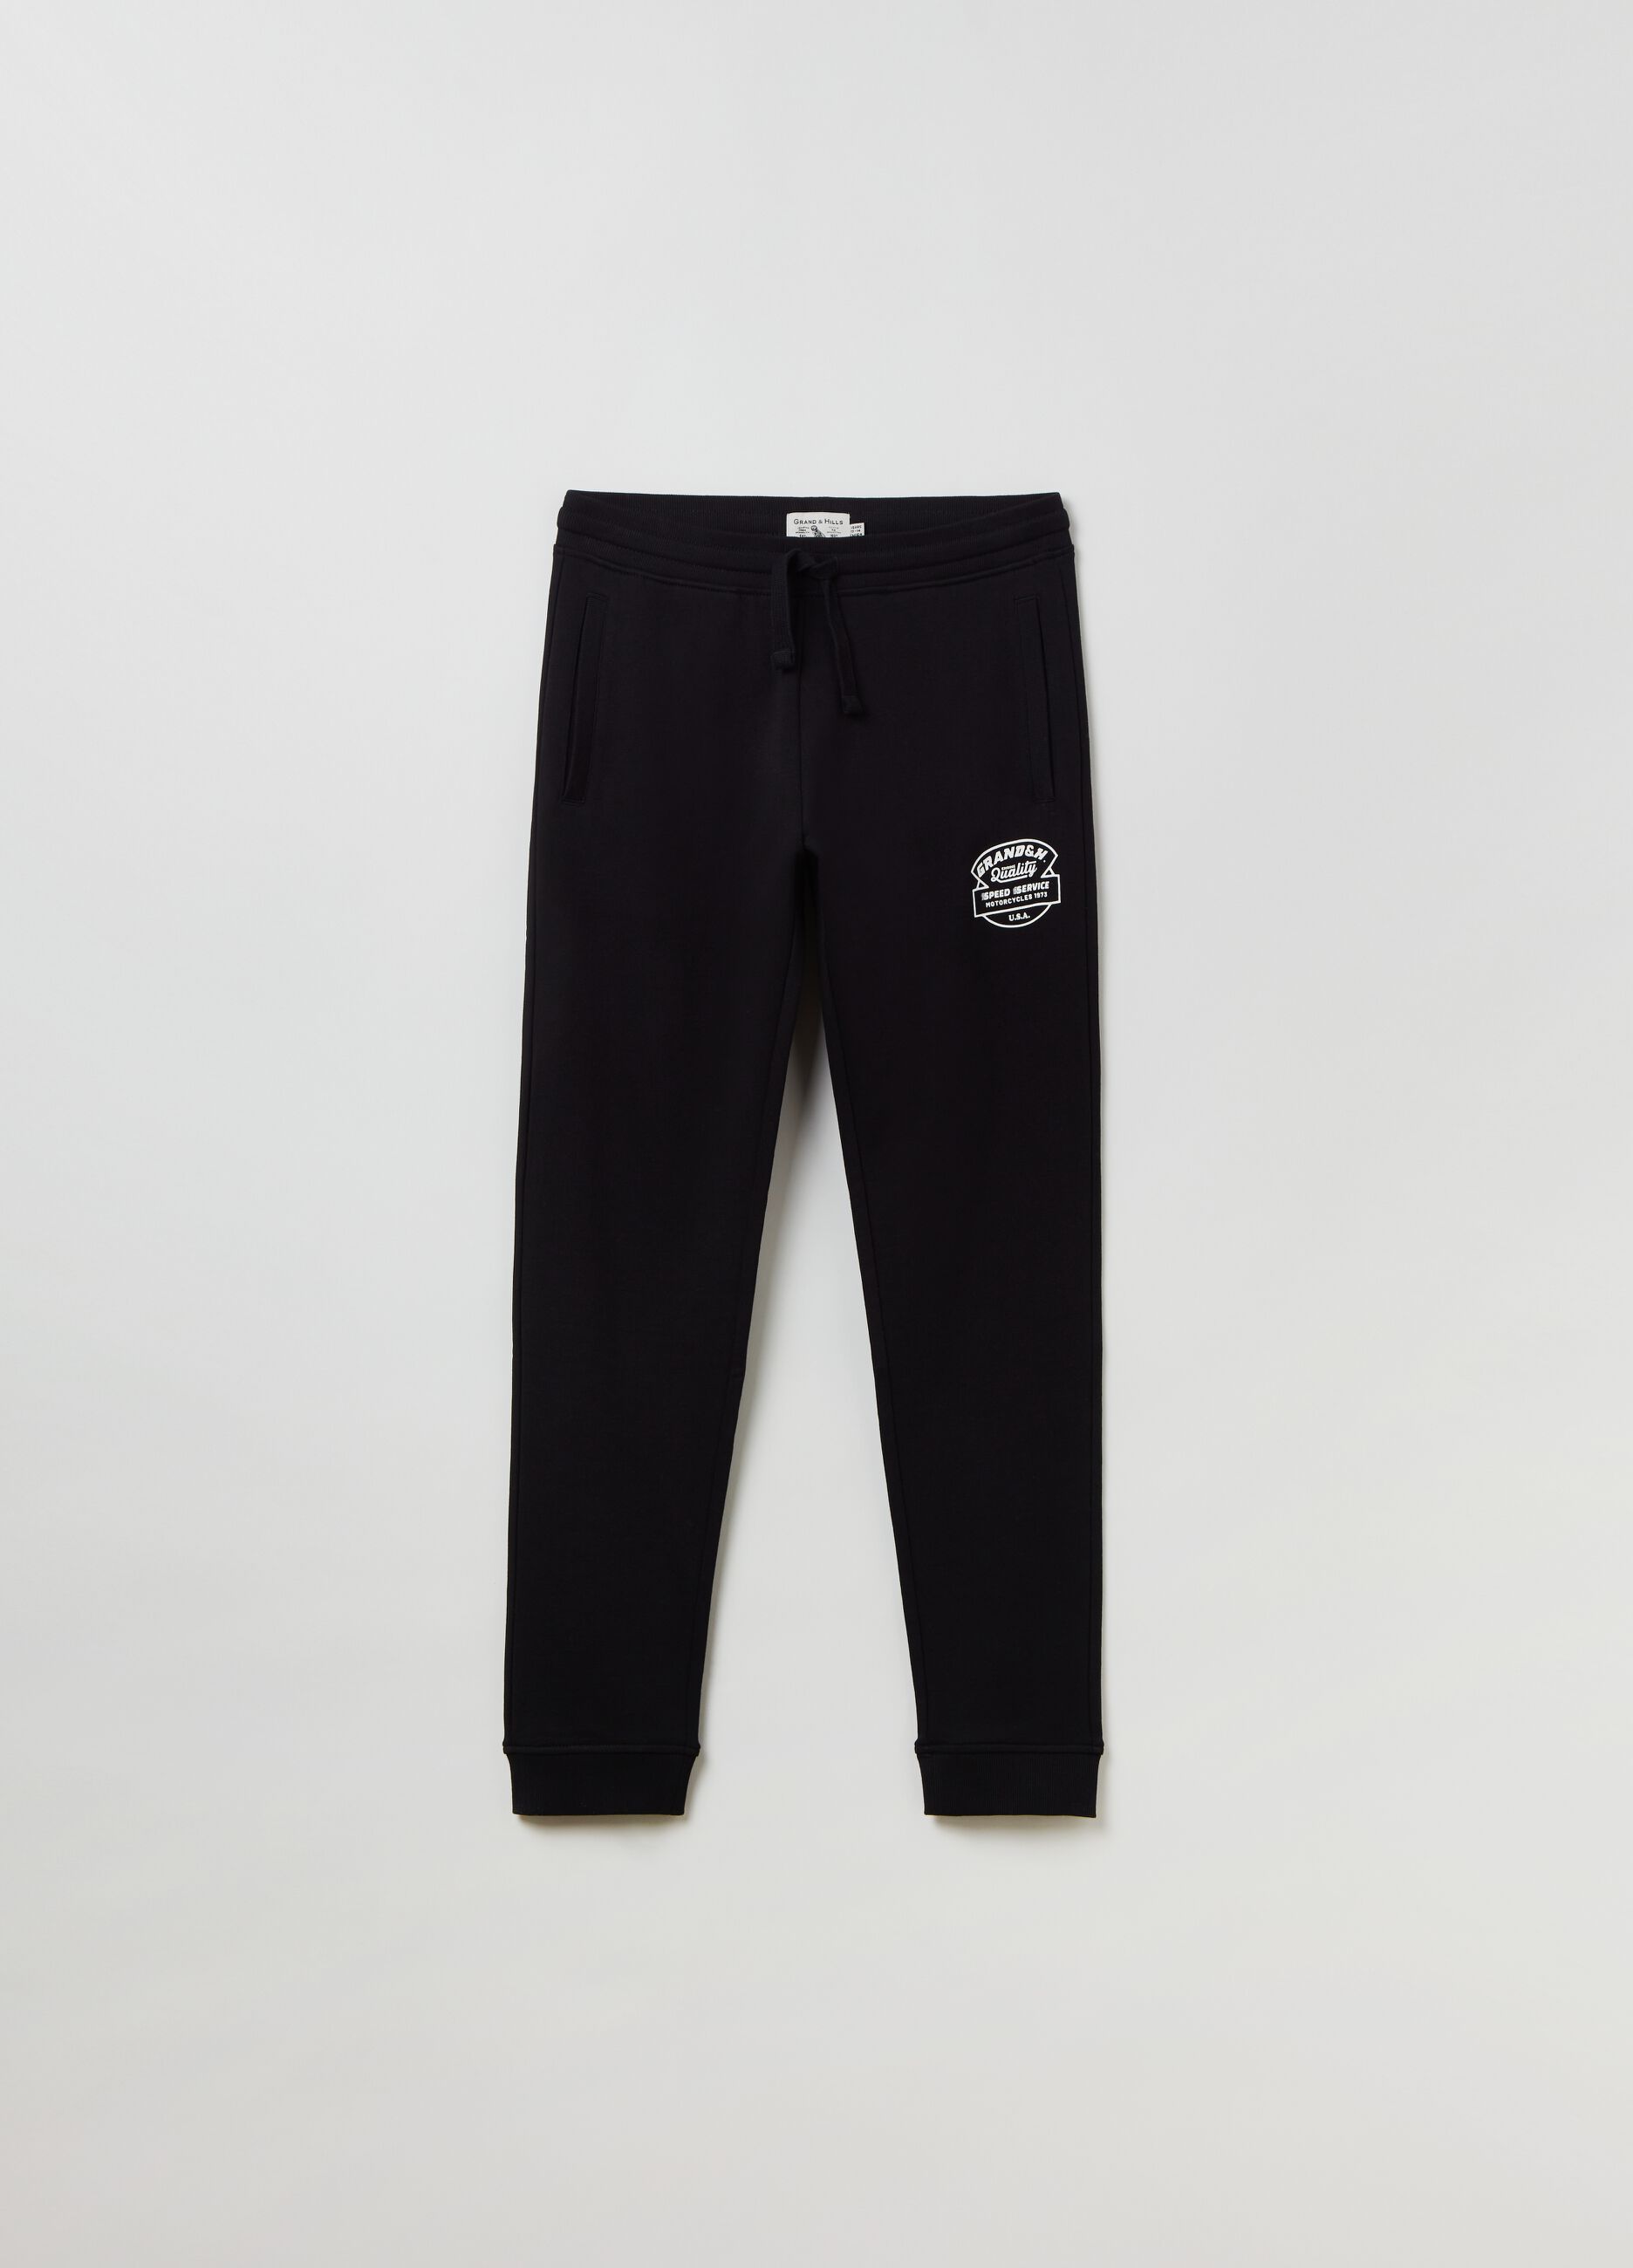 Grand&Hills plush joggers with drawstring and print